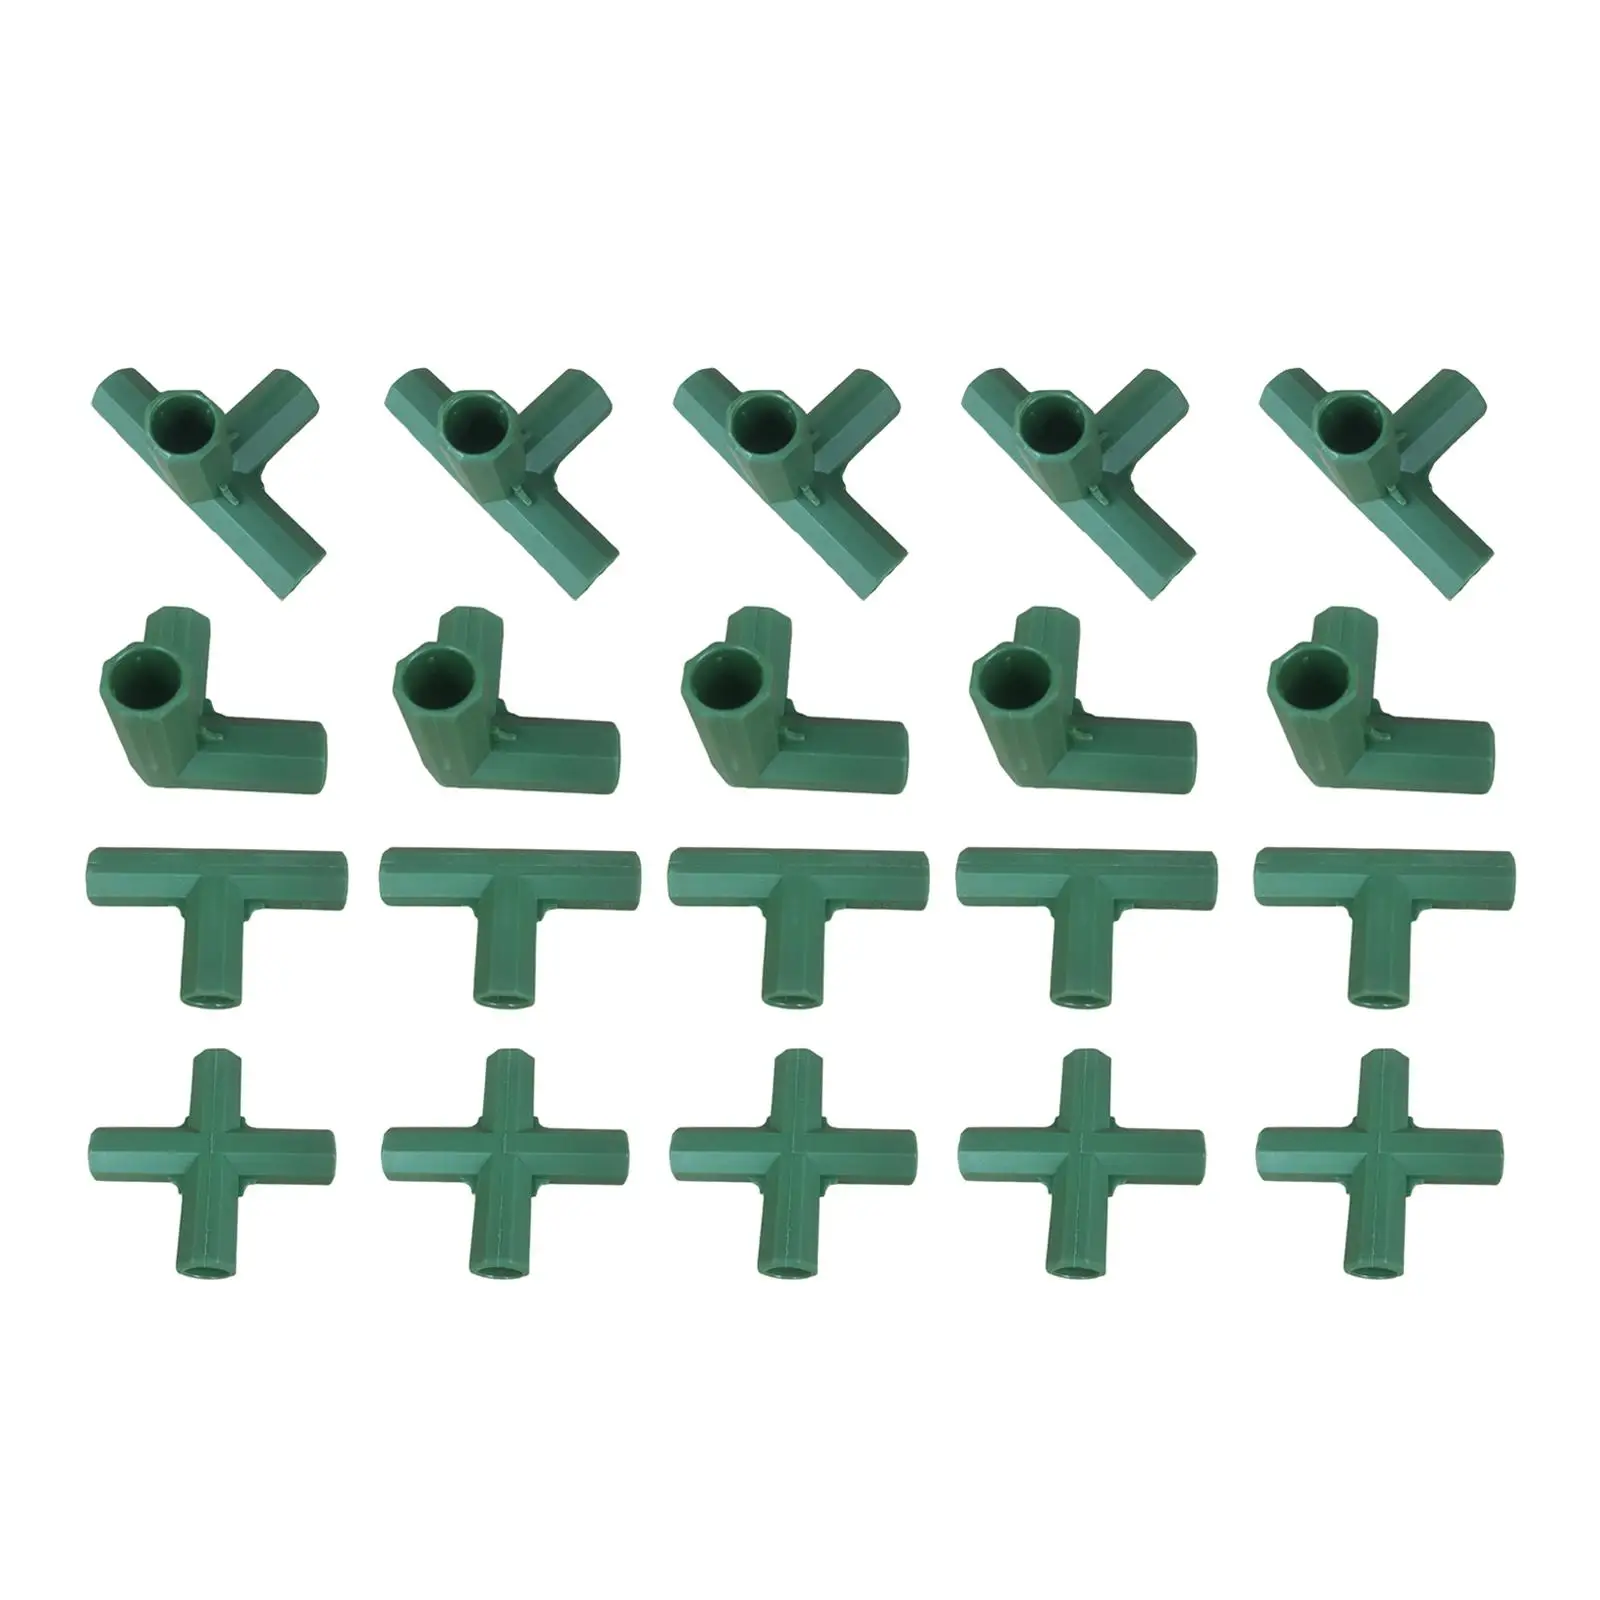 Set of 20 Durable Green Plastic Greenhouse Joints Gardening Awning Joints